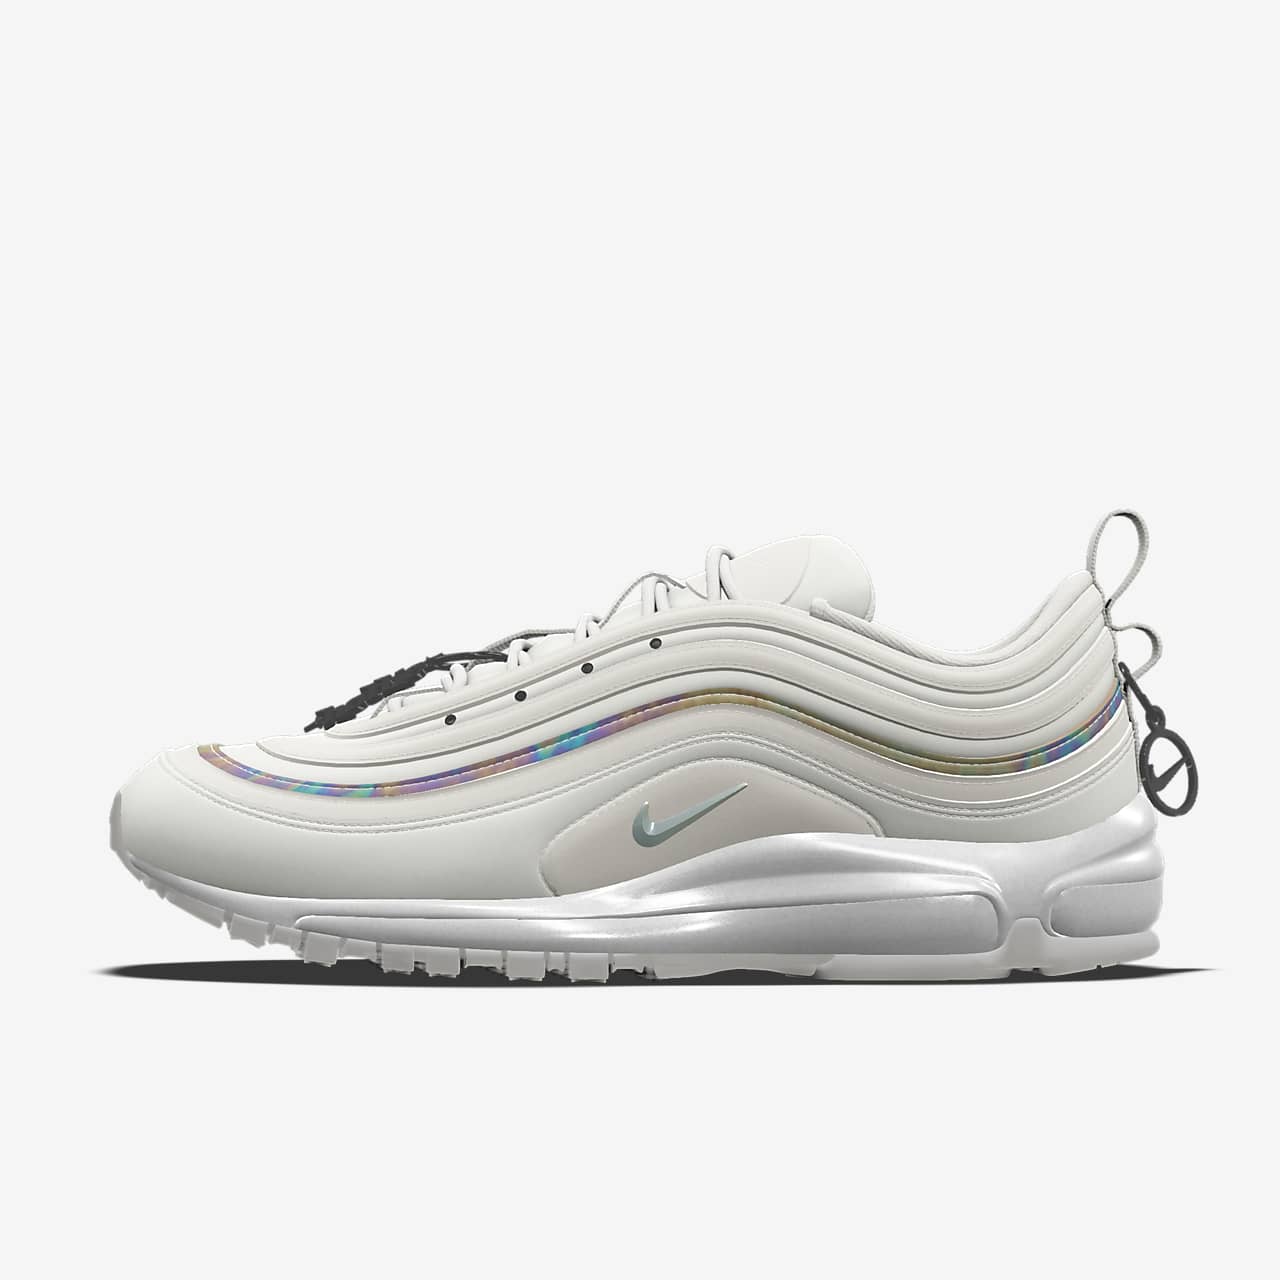 Nike Air Max 97 'Tina Snow' By You customized schoenen